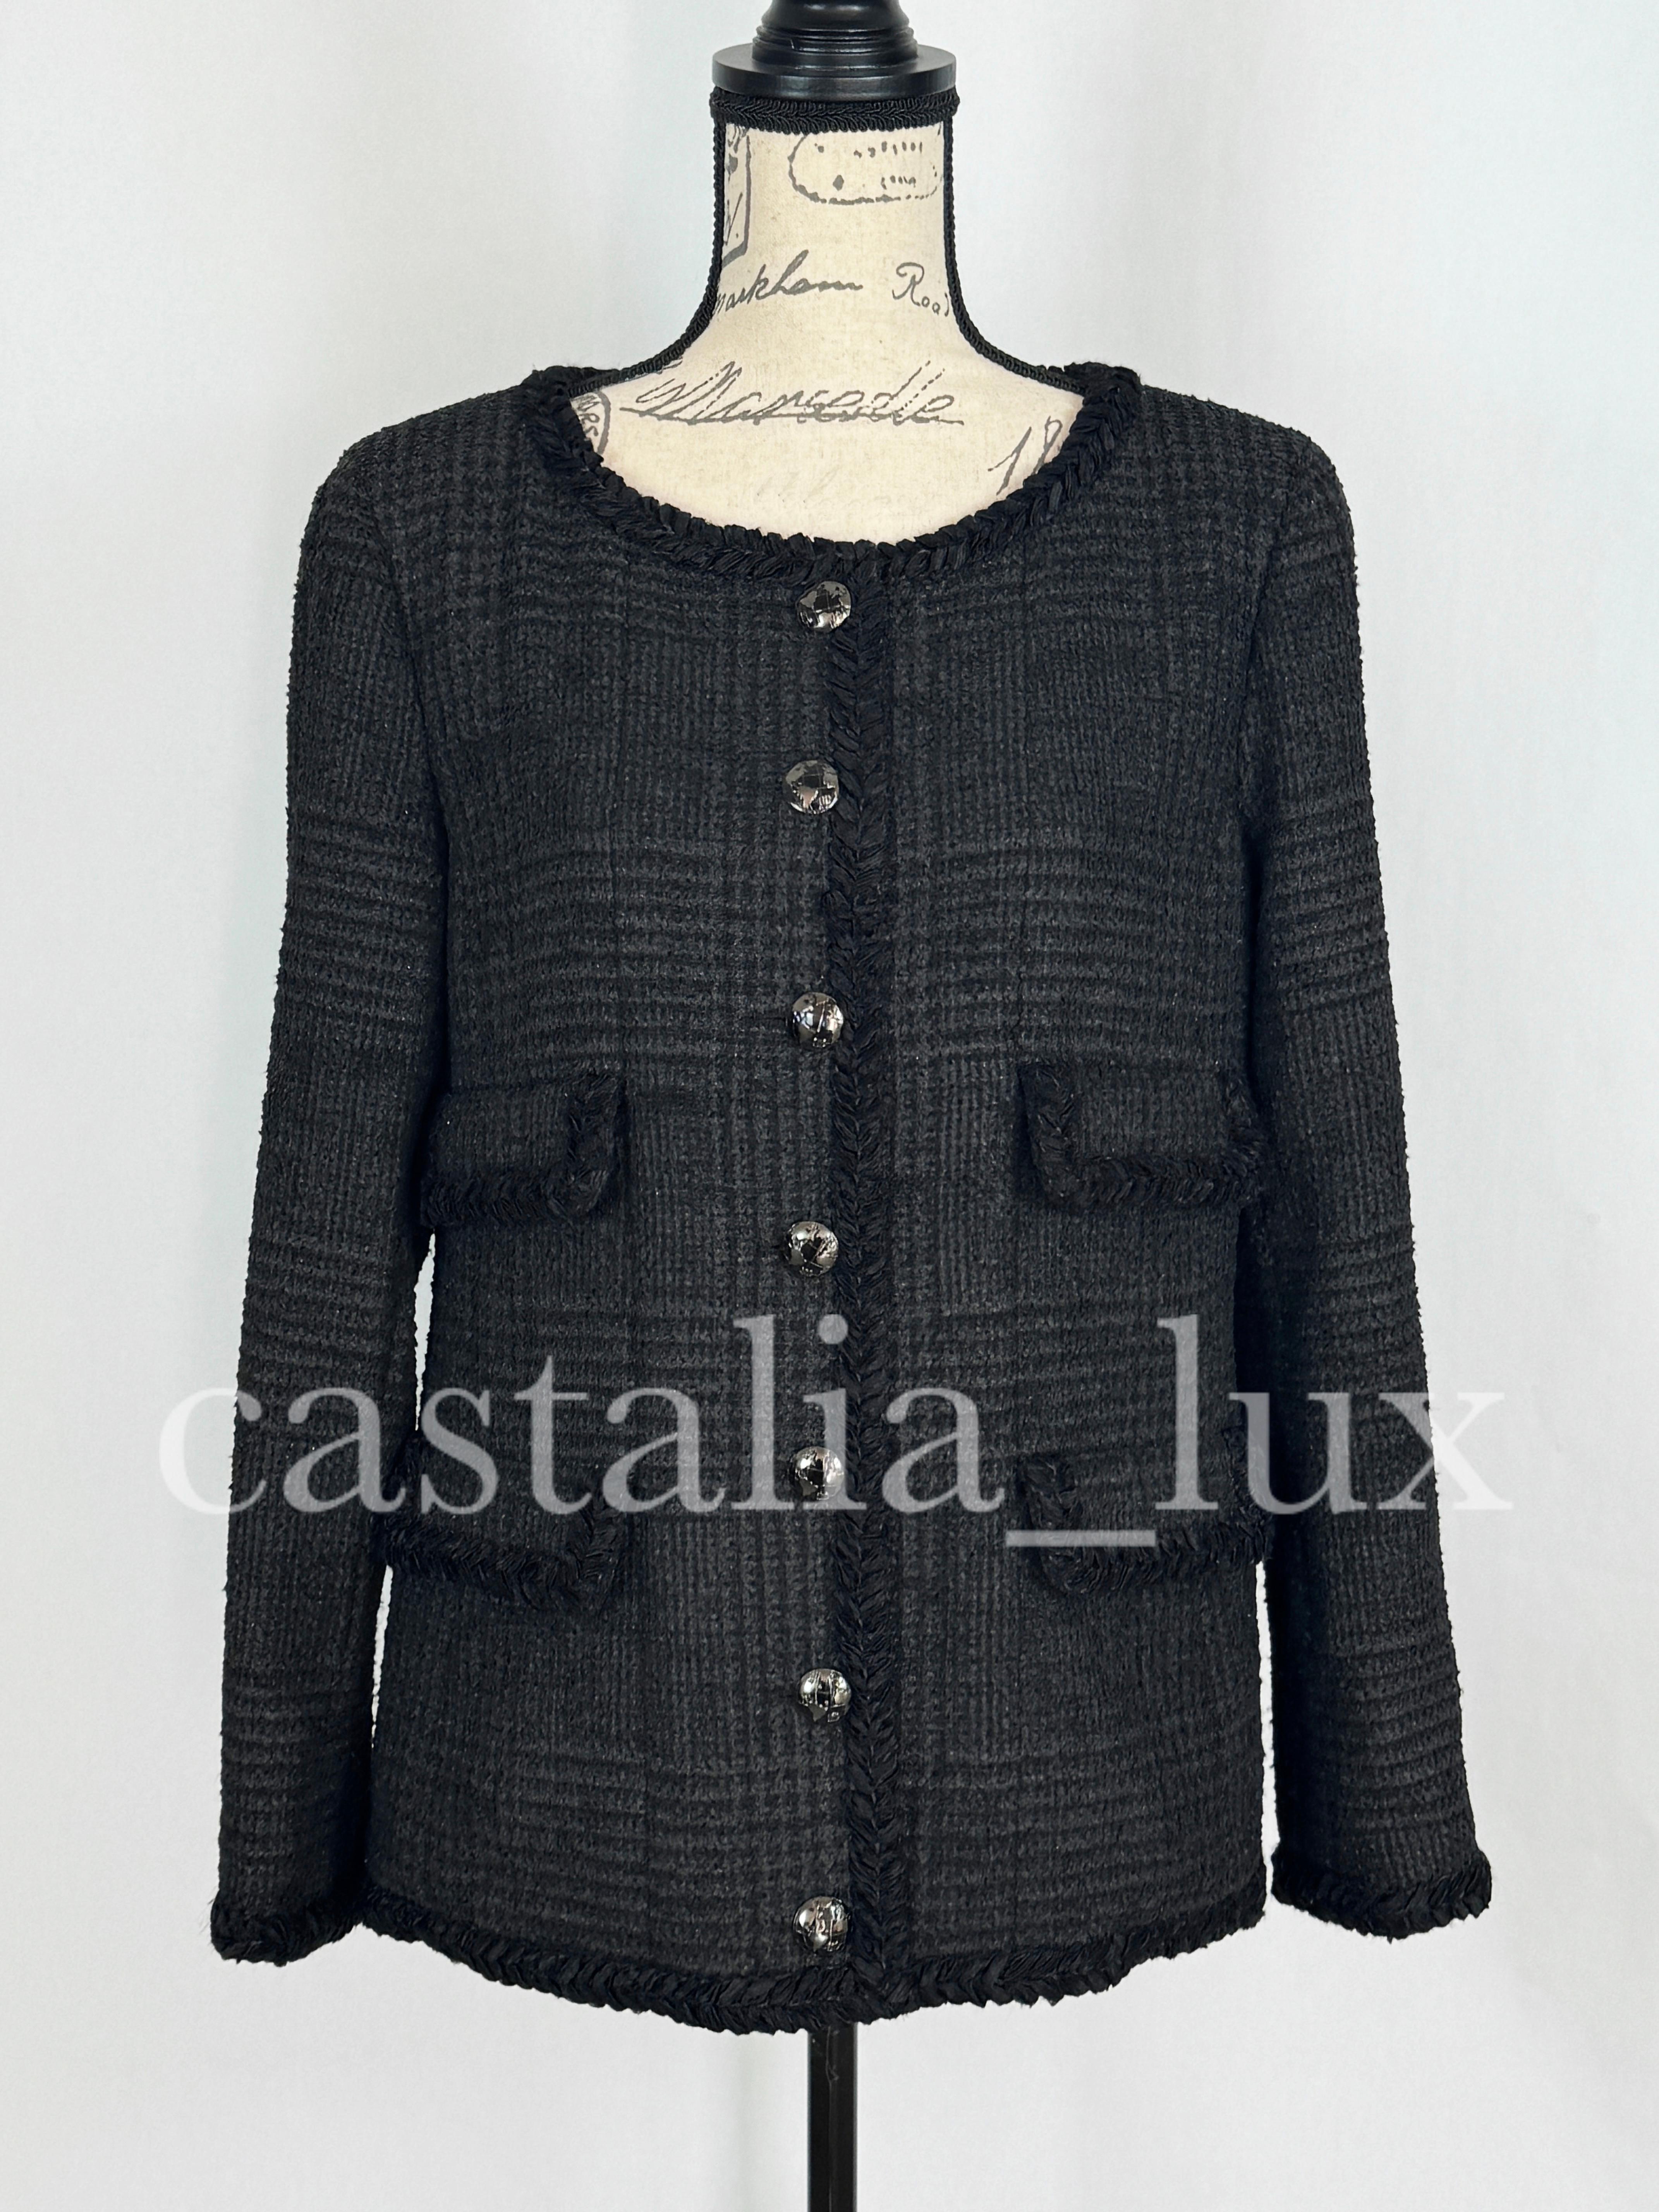 Chanel Most Iconic Globalization Collection Black Tweed Jacket For Sale 7